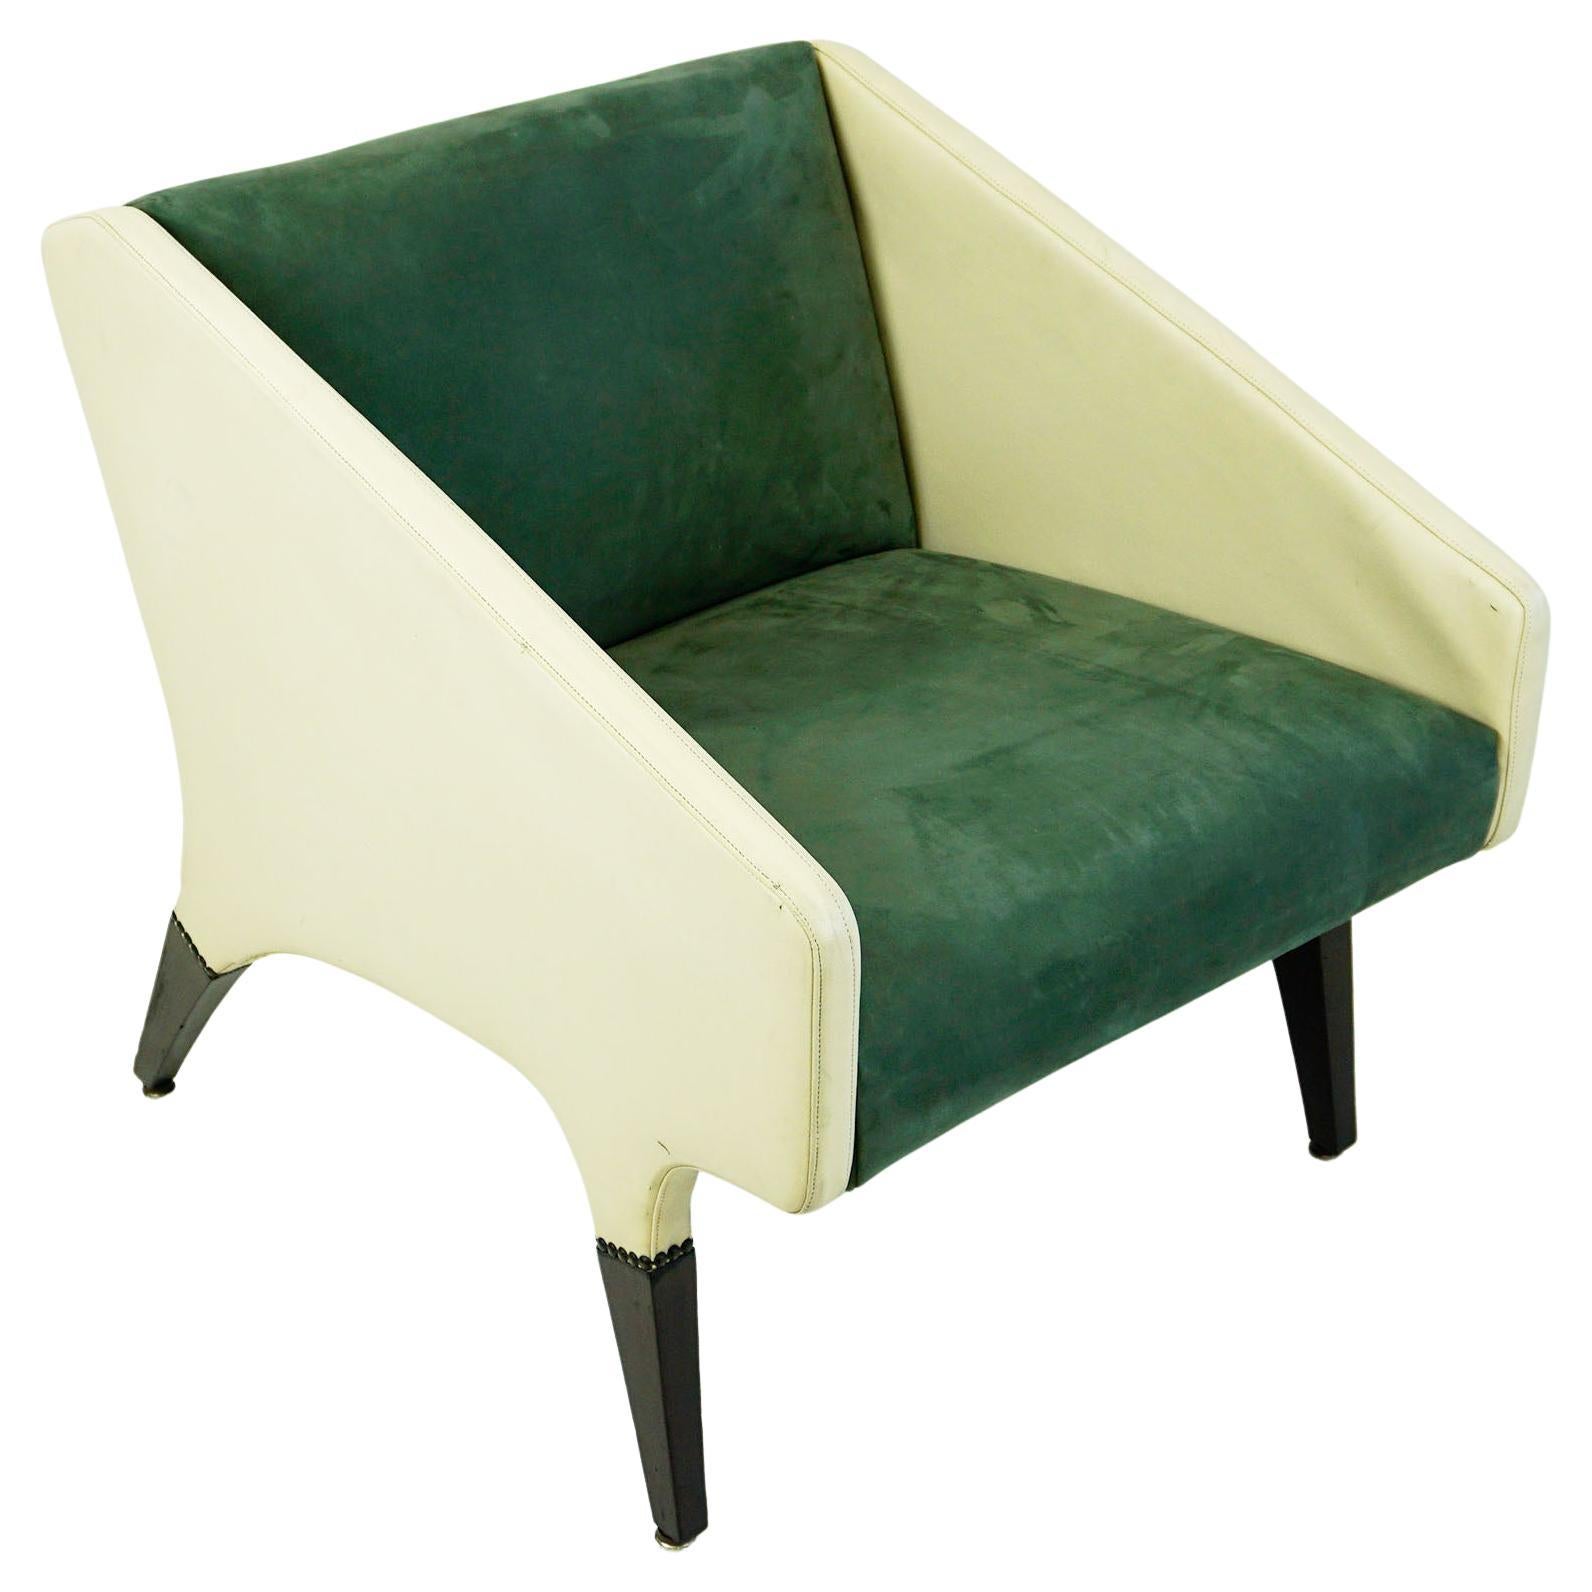 Italian Midcentury Parco dei Principi Lounge Chair by Gio Ponti for Cassina